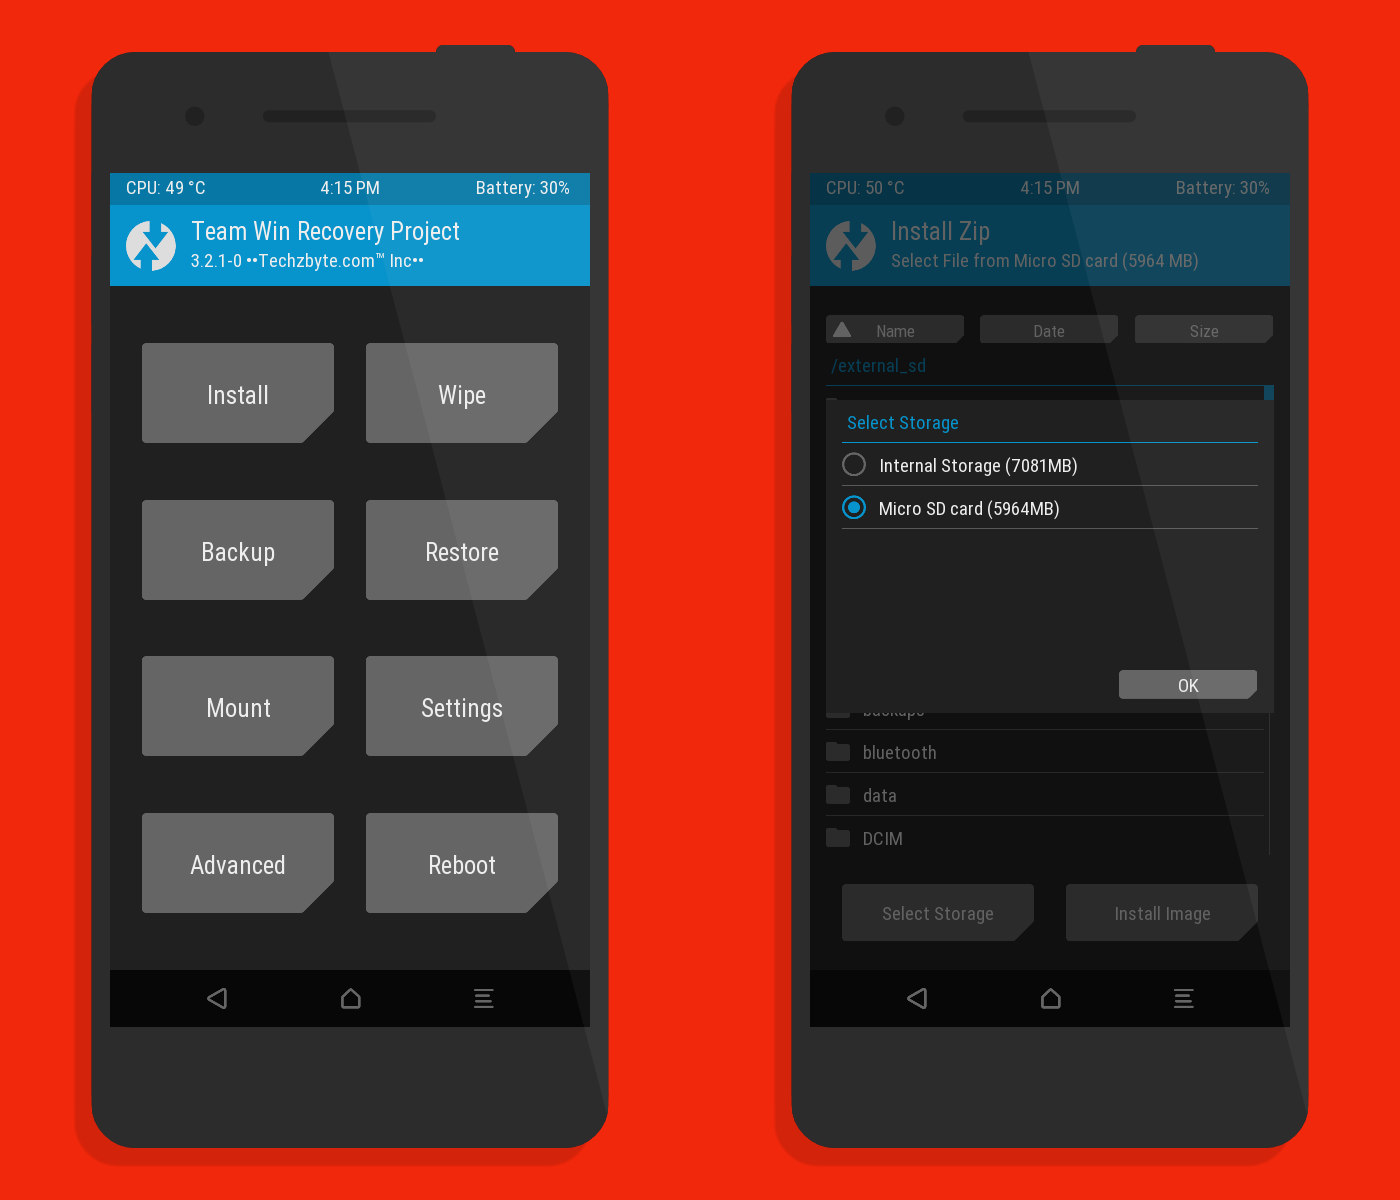 TWRP 3.2.1 for Infinix hot 2